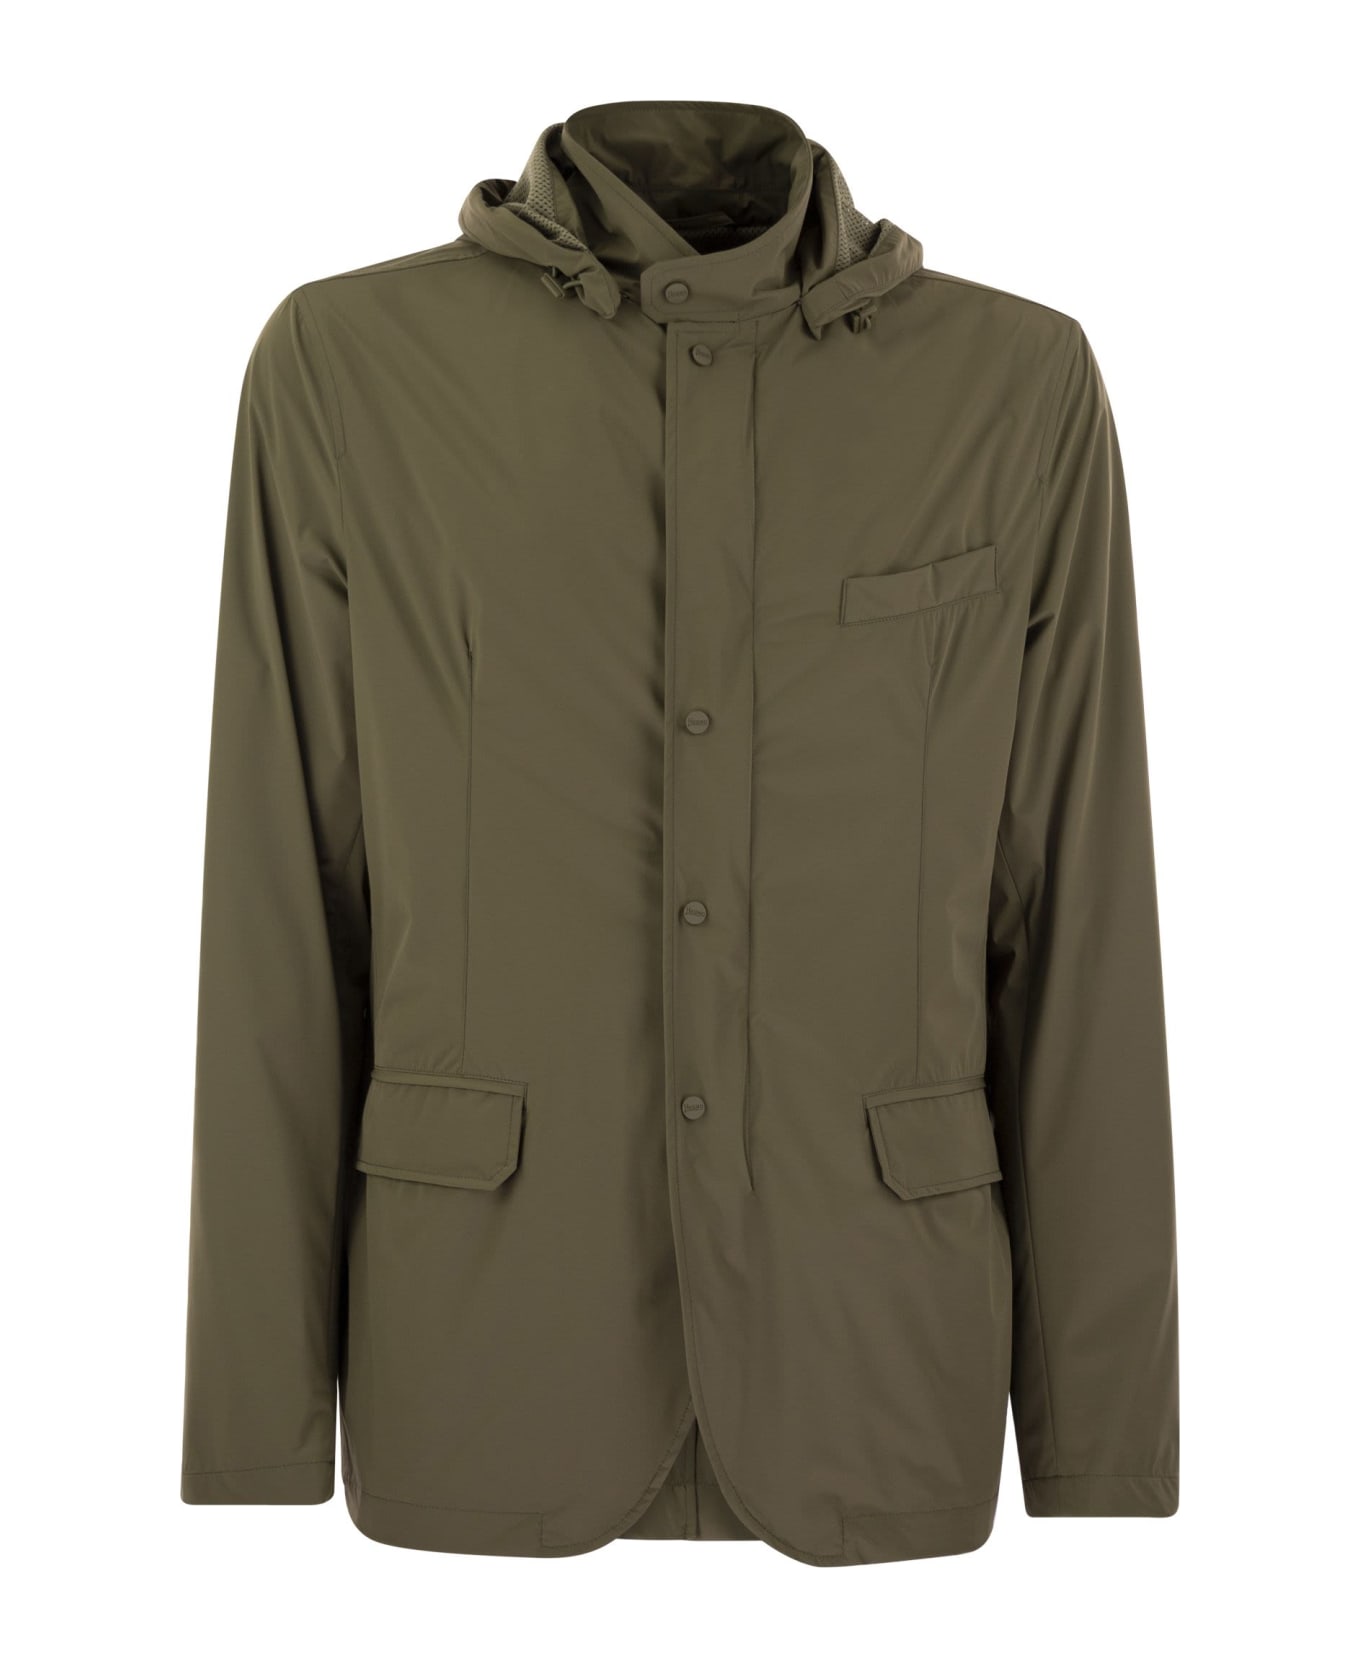 Herno Technical Fabric Jacket With Hood - Military Green ジャケット